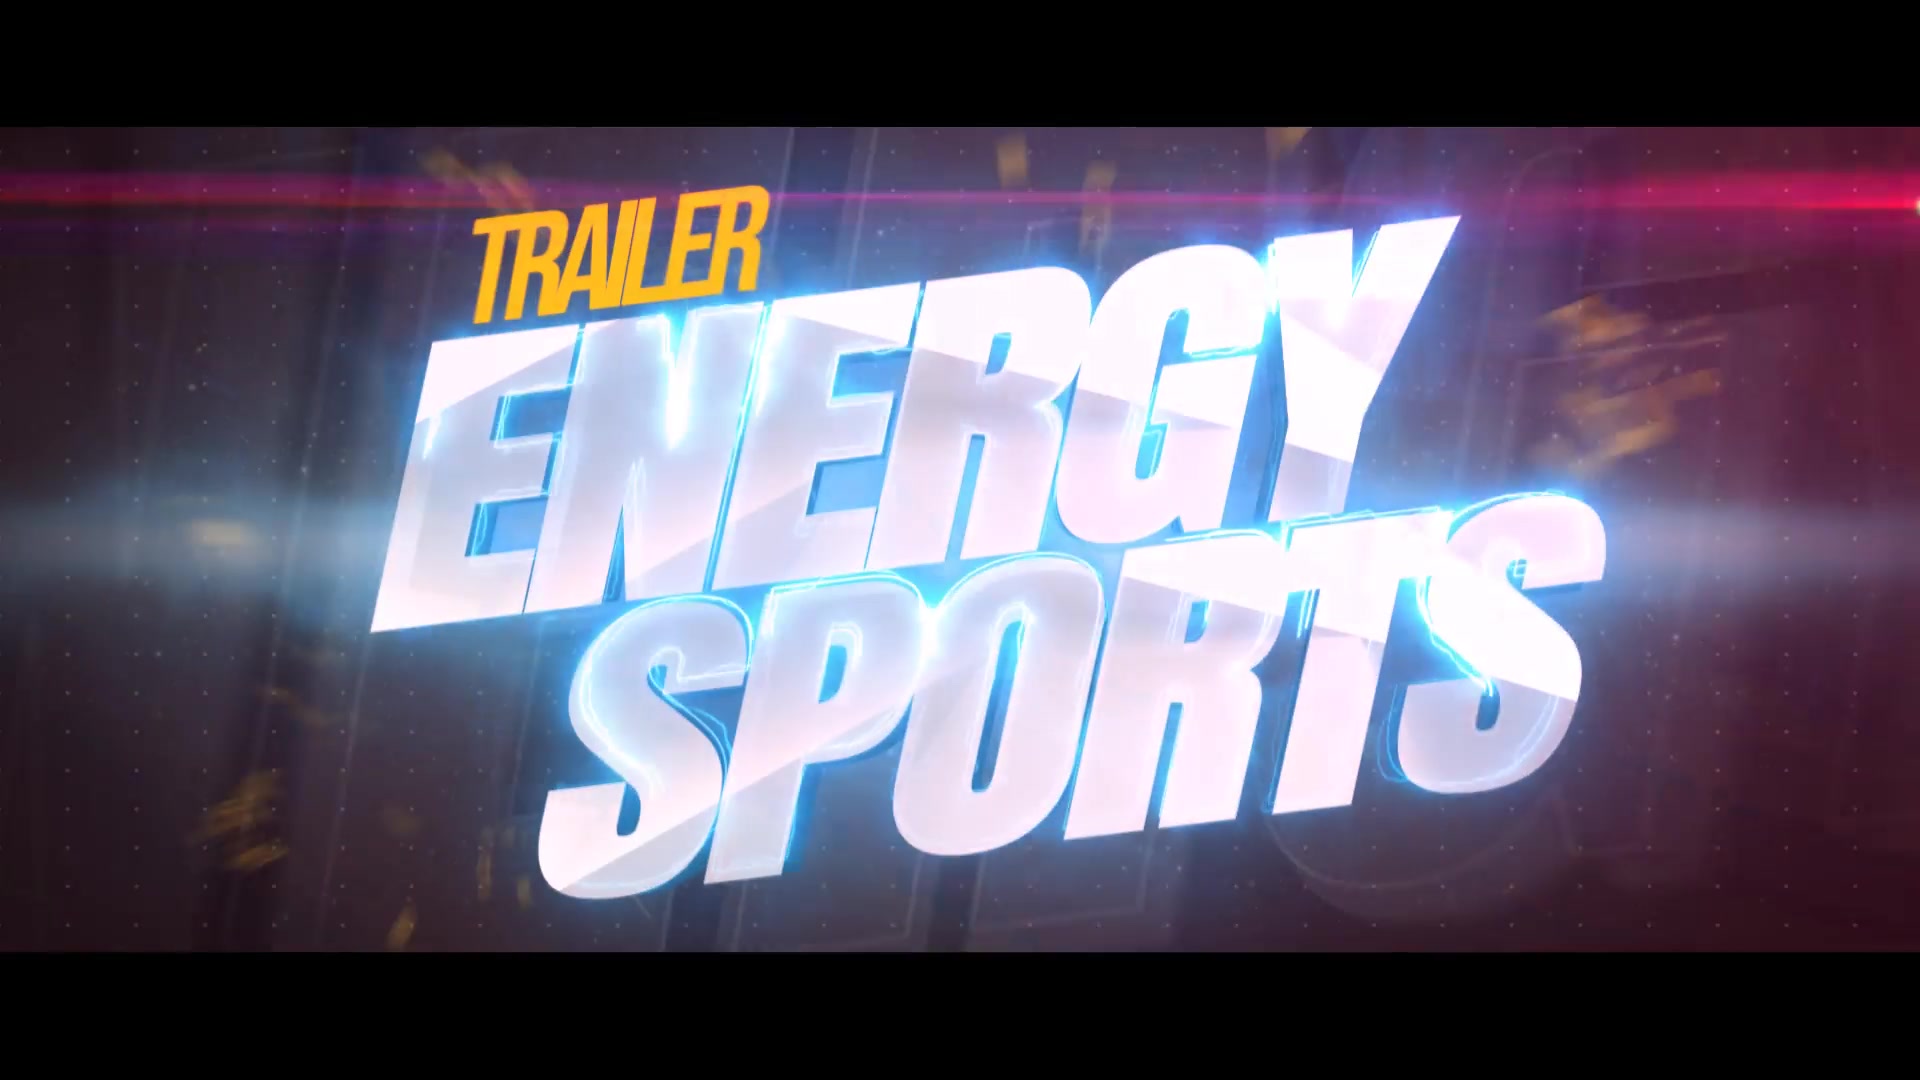 Energy Sports Promo - Download Videohive 22968516